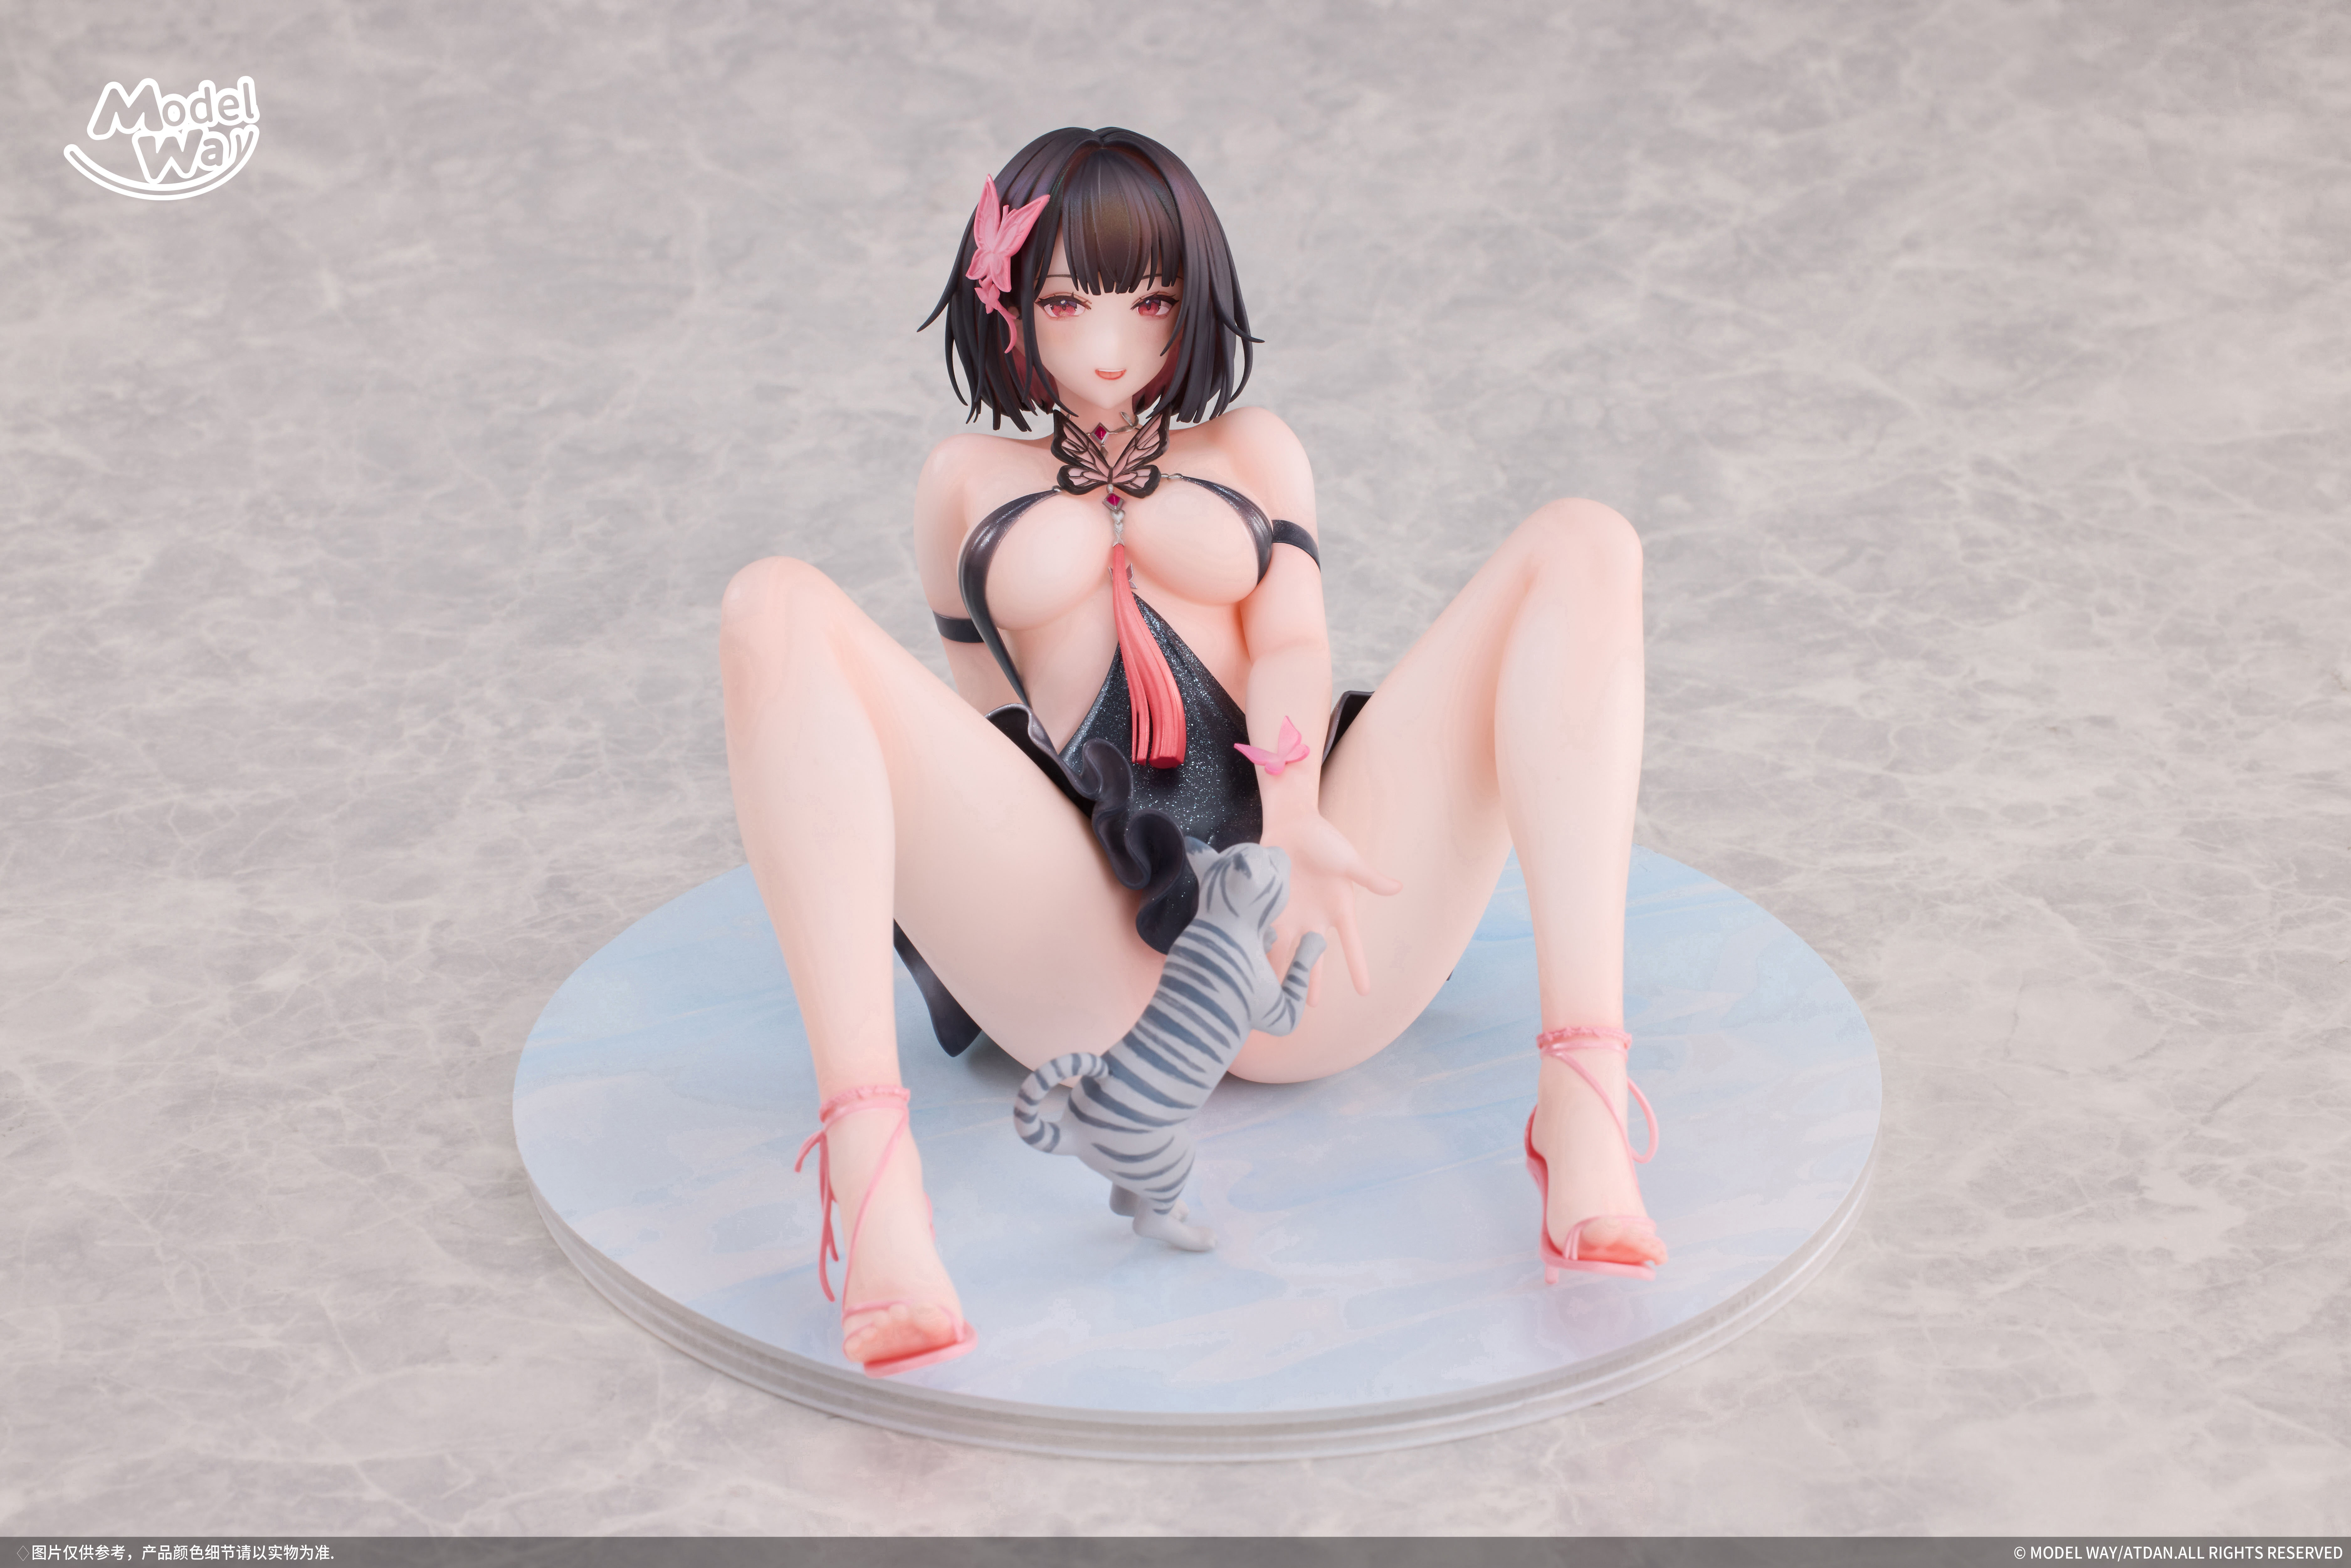 MODEL WAY LILY 1/6 SCALE FIGURE